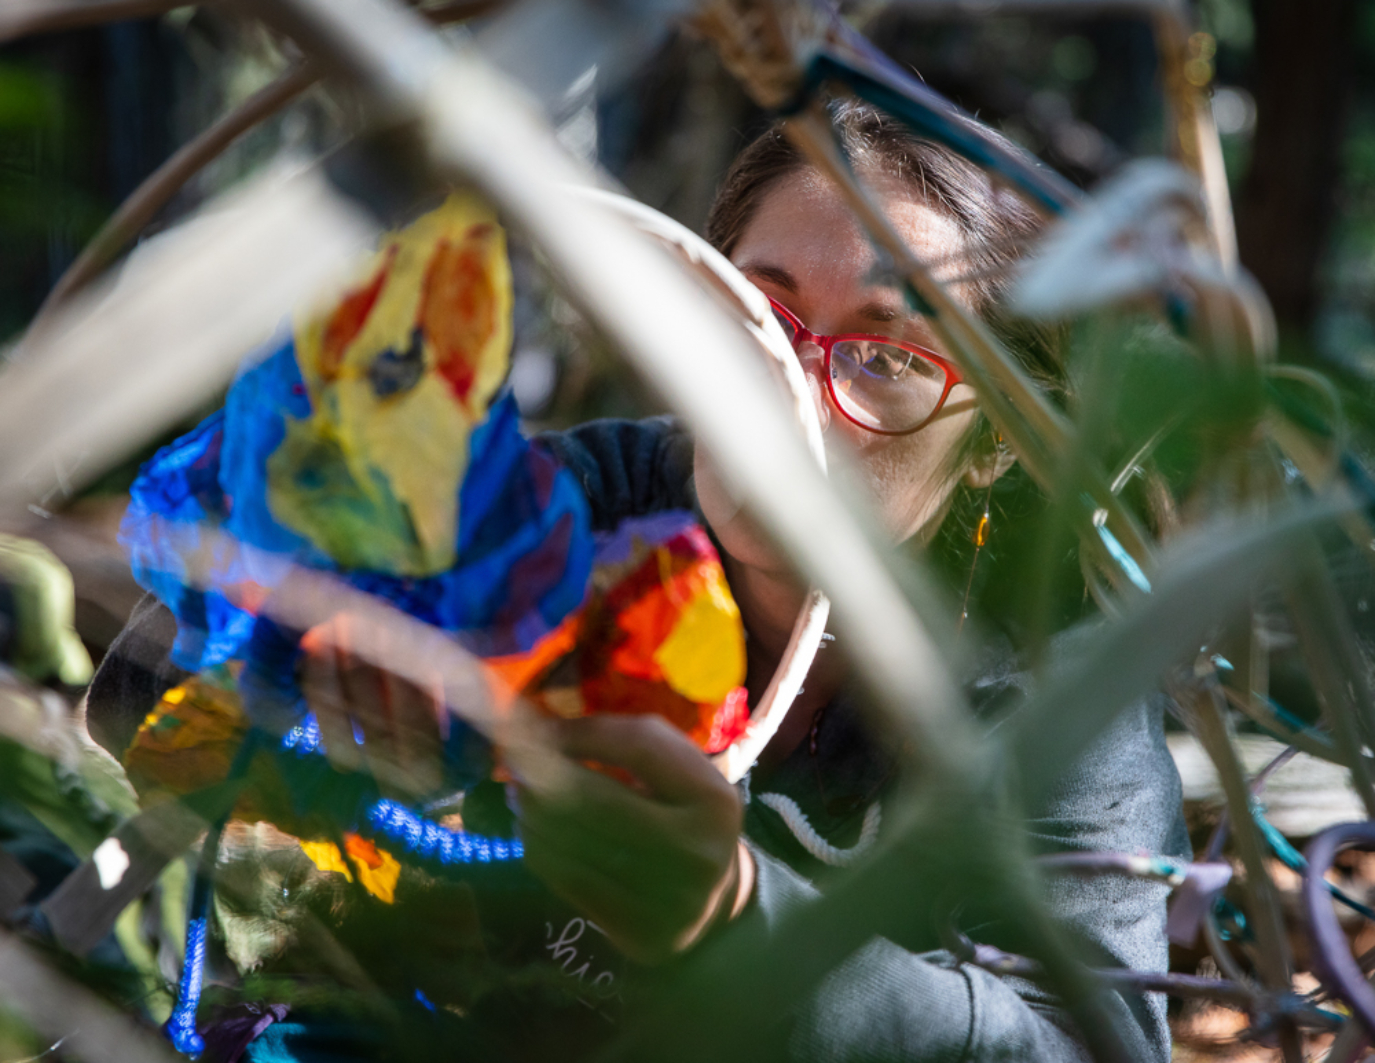 The artist face is behind a tangle of materials as she installs the puppet. She is wearing red glasses and her hands are affixing flowers to the bamboo structure.